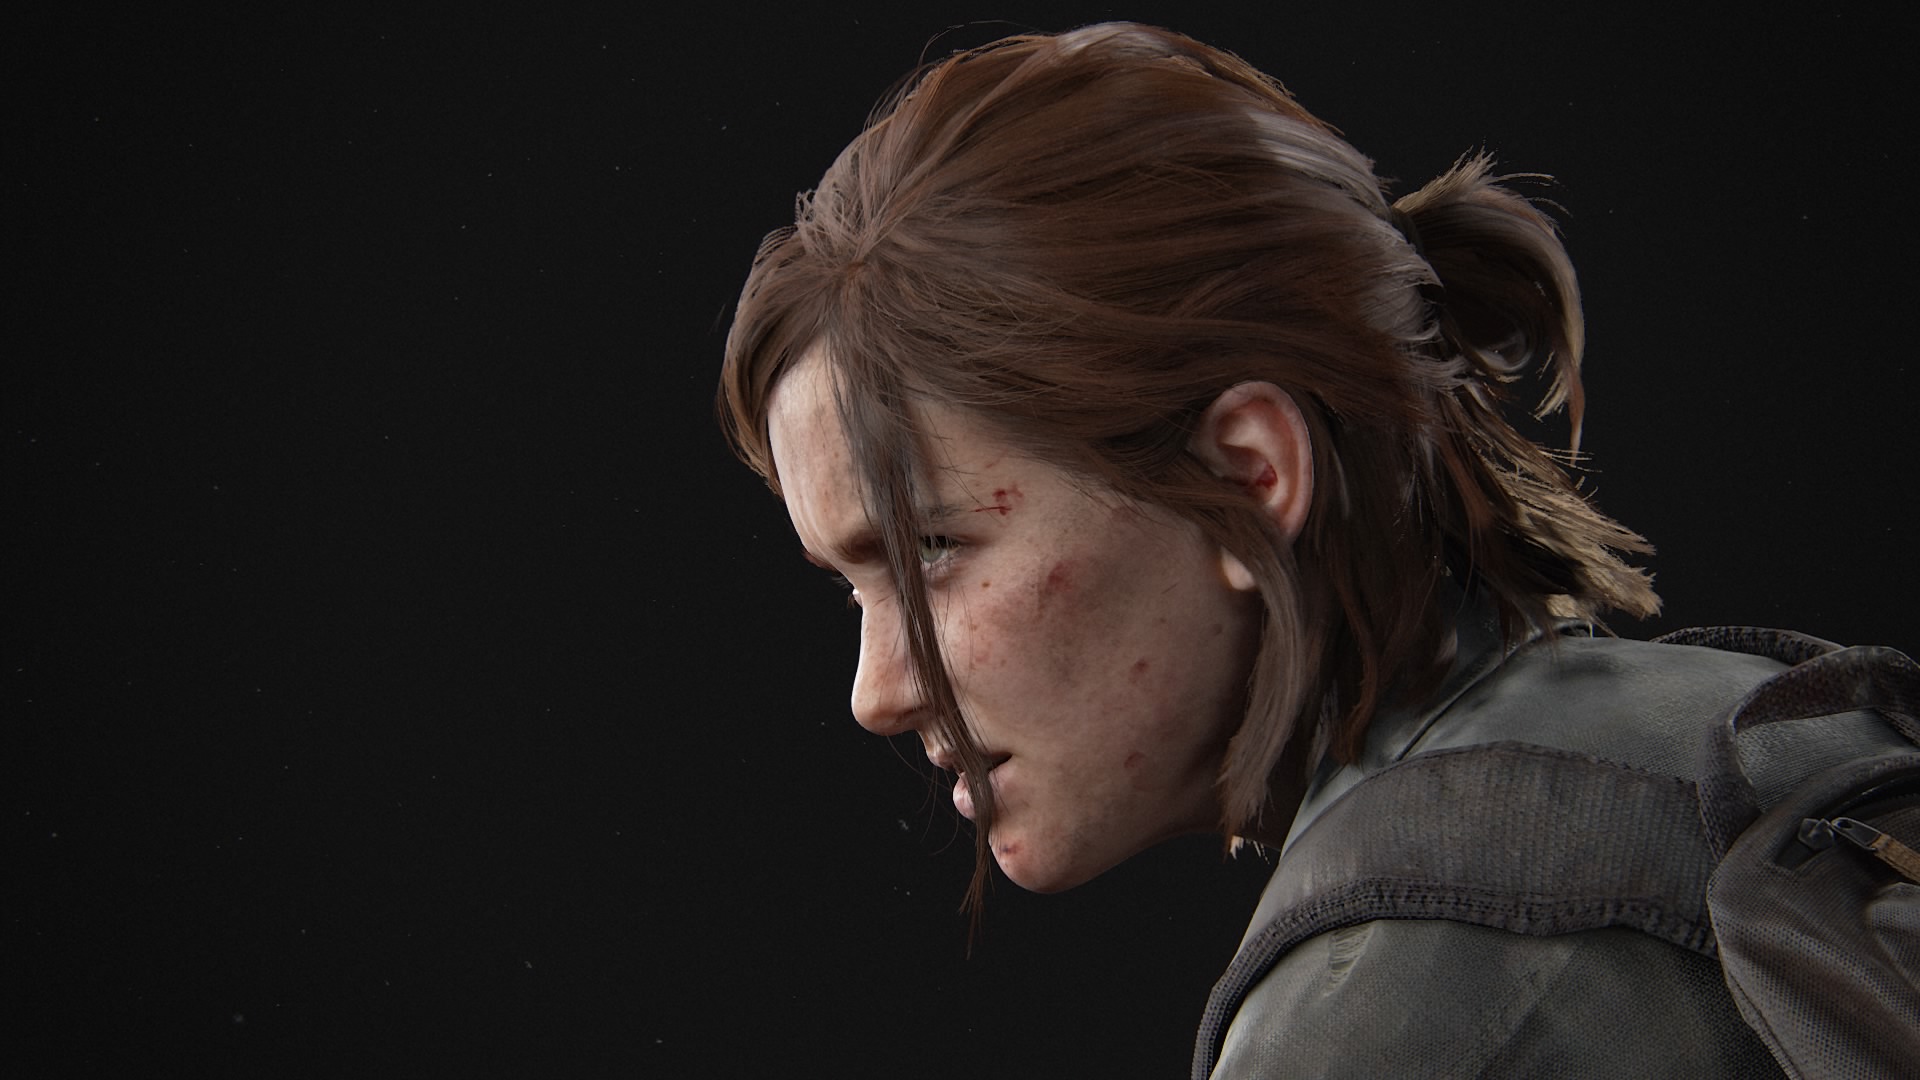 Ellie Williams, The Last of Us 2, video games, PlayStation 4, screen shot